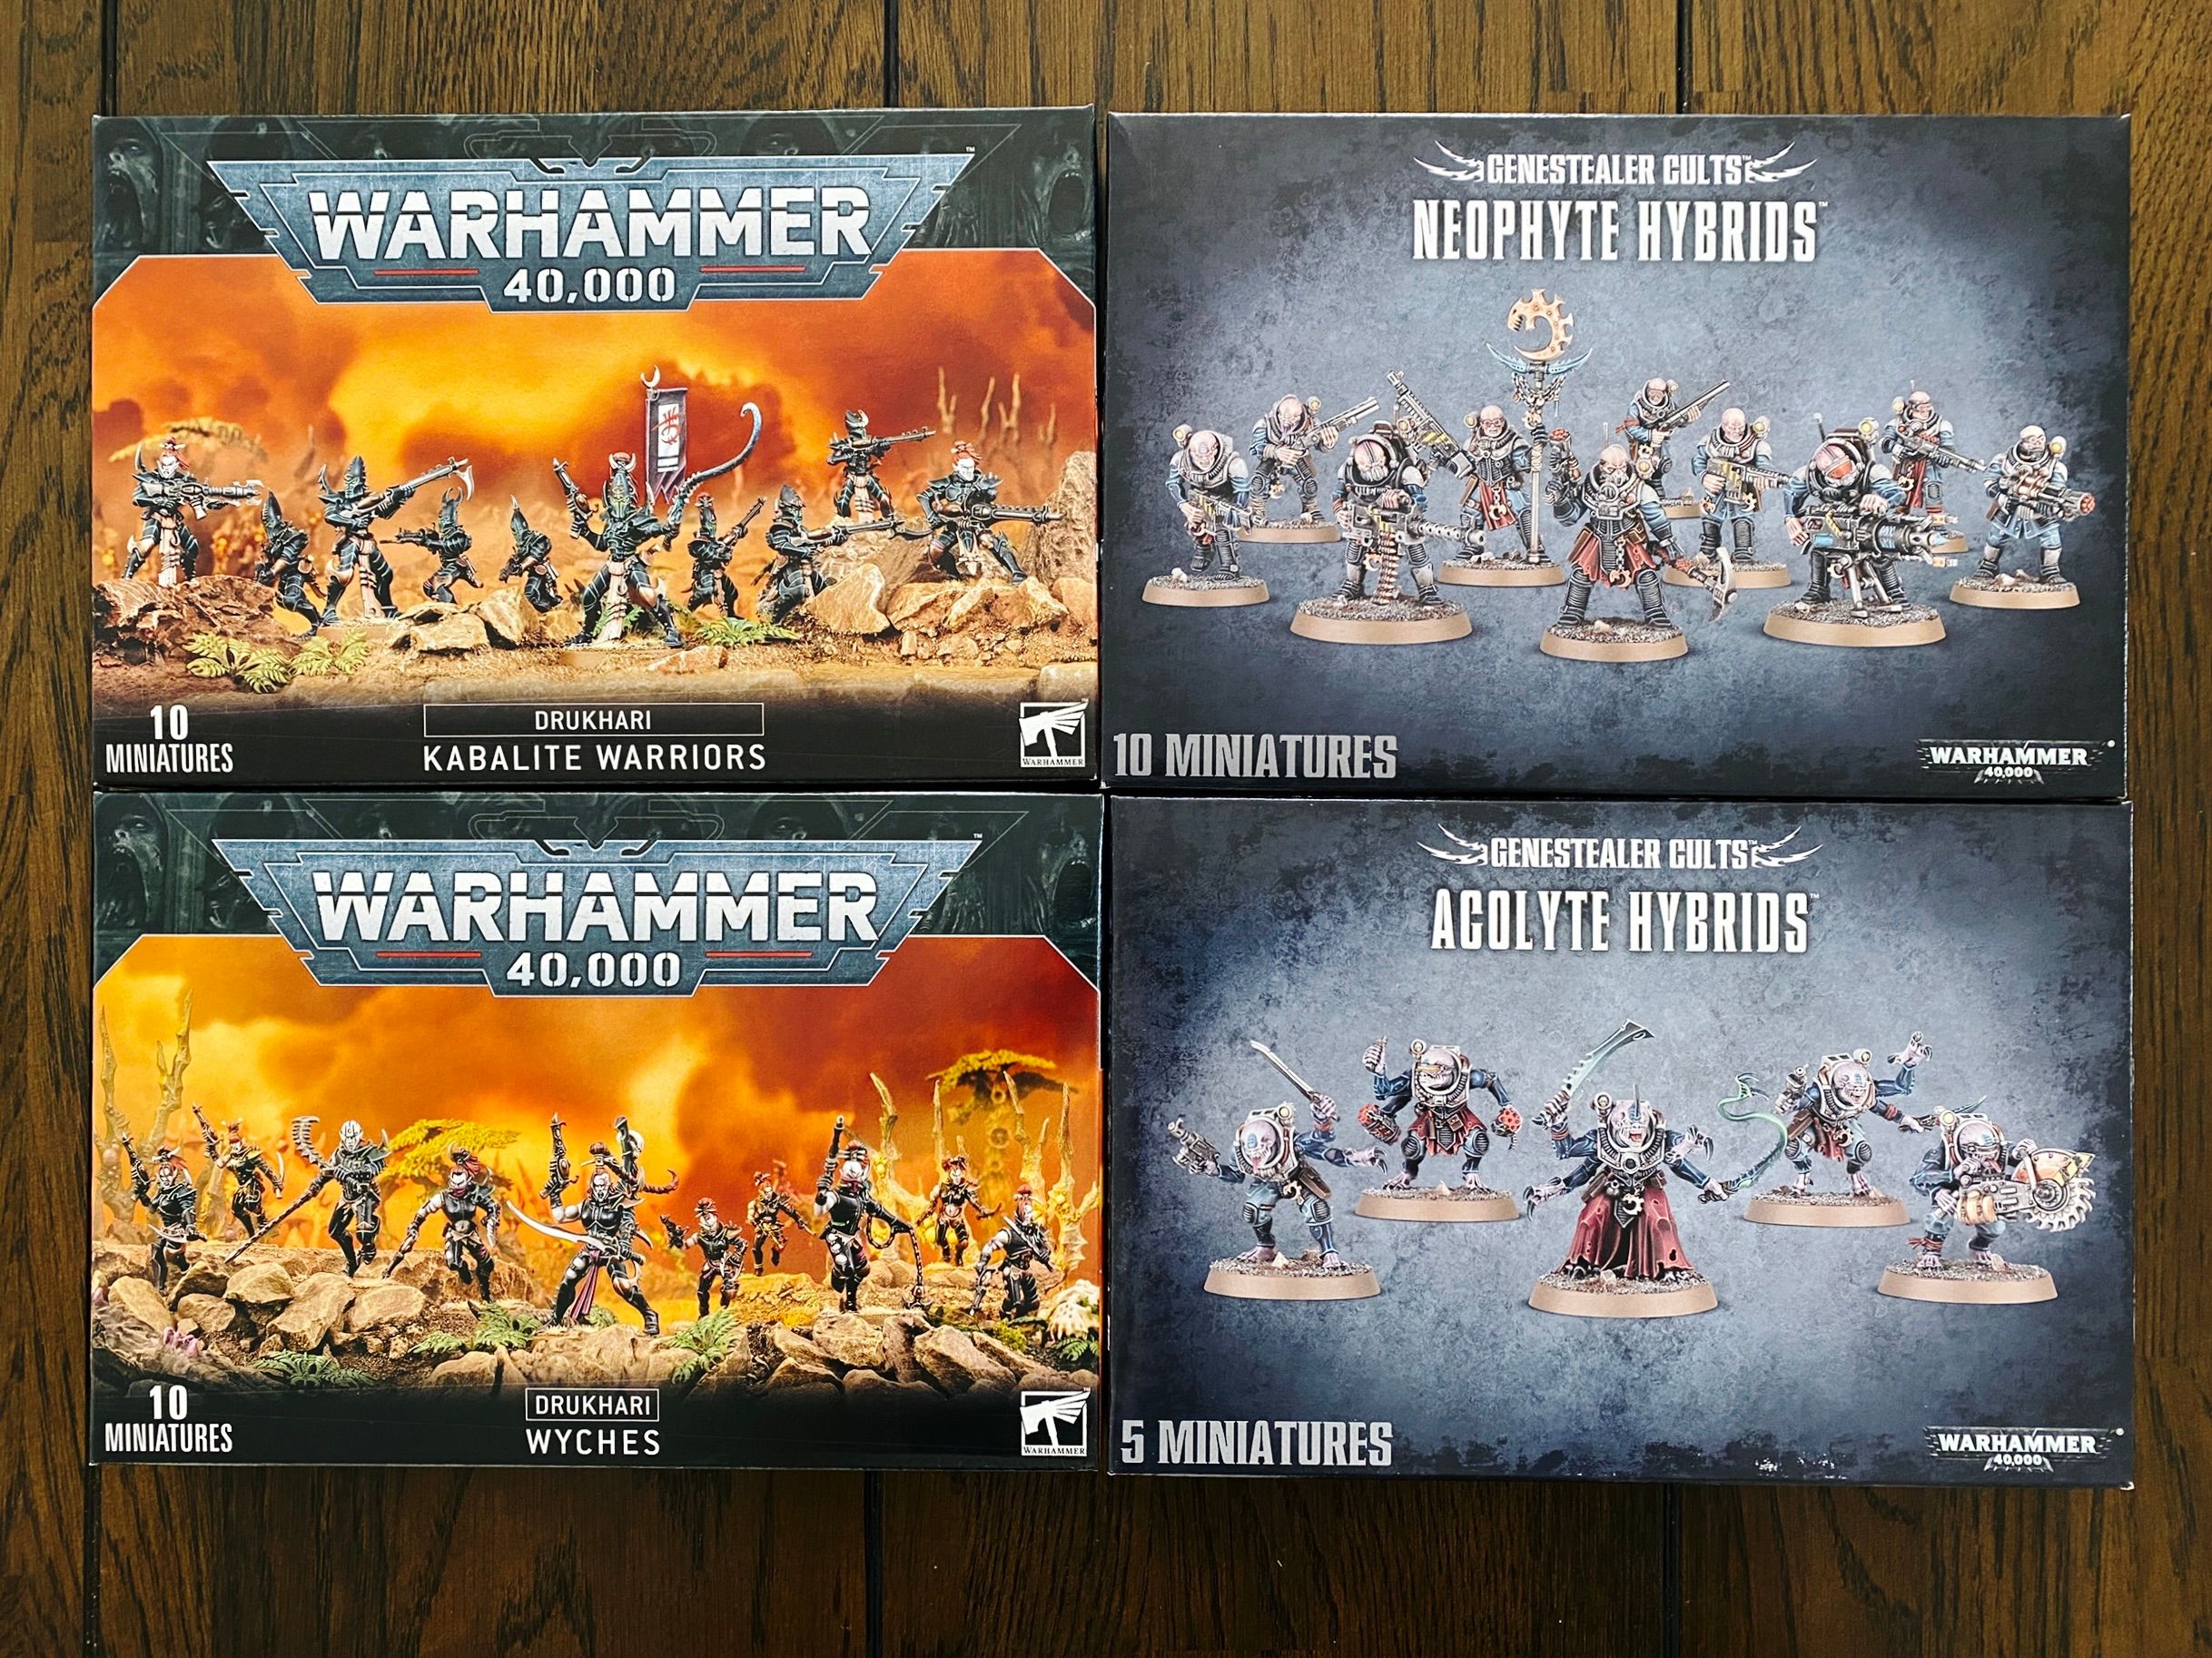 A photo of four boxes of Warhammer 40,000 miniatures. Kabalite Warriors and Wyches for the Drukhari (think sadistic space elves), and Neophyte Hybrids and Acolyte Hybrids for the Genestealer Cults (the Neophytes are broadly human but with heads that are slightly too bulbous and alien-looking, the Acolytes are humanoid but with 3 arms and heads more like the alien from the movie Alien).